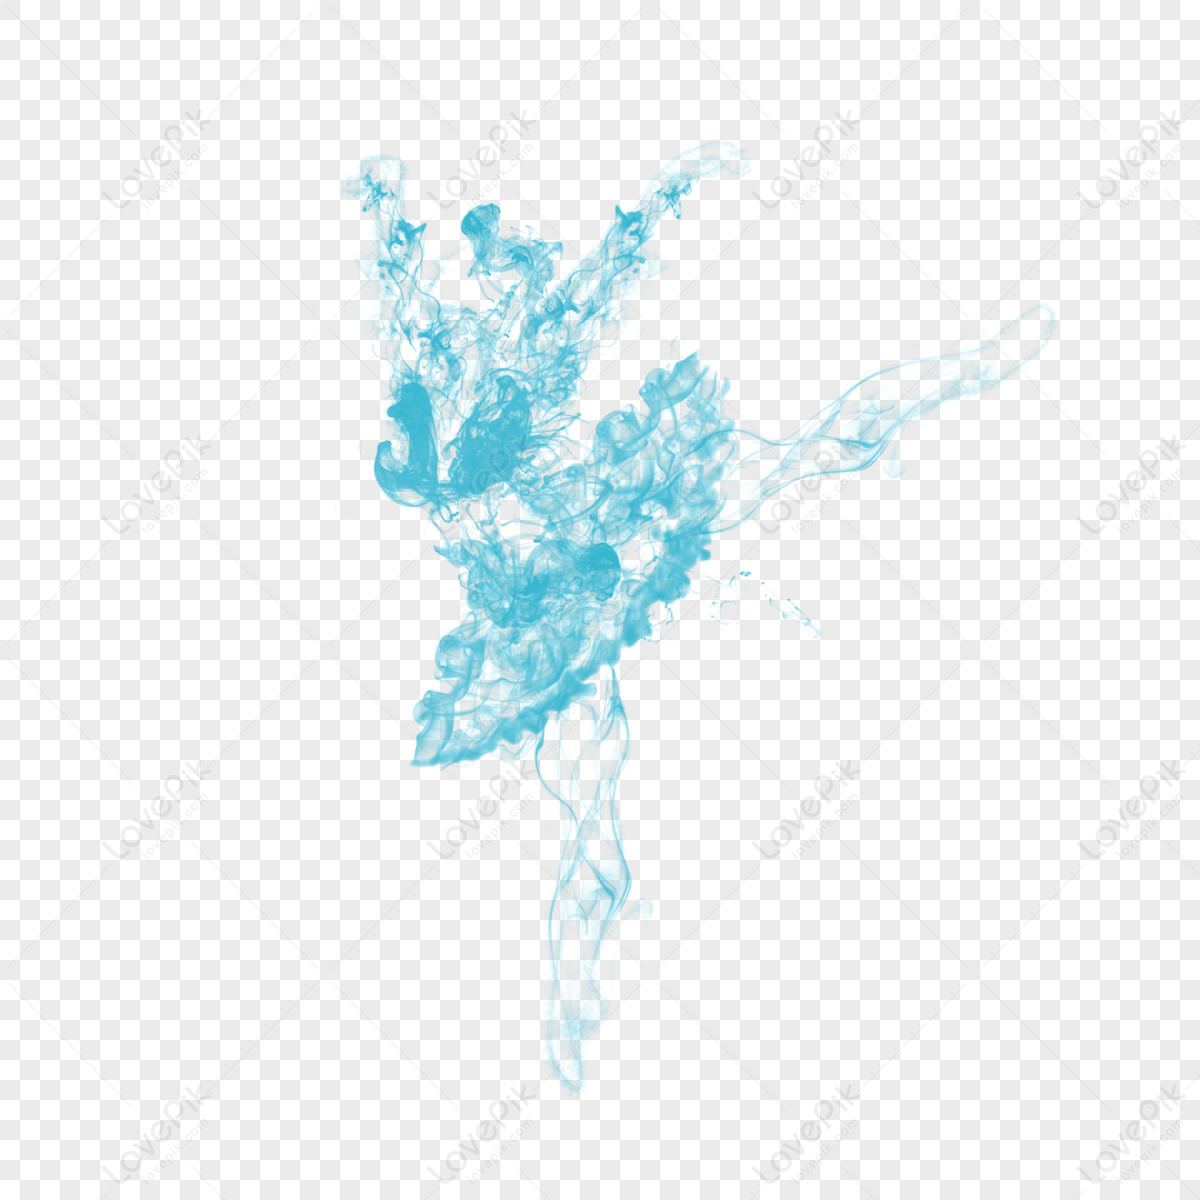 Dance Postures PNG Images With Transparent Background